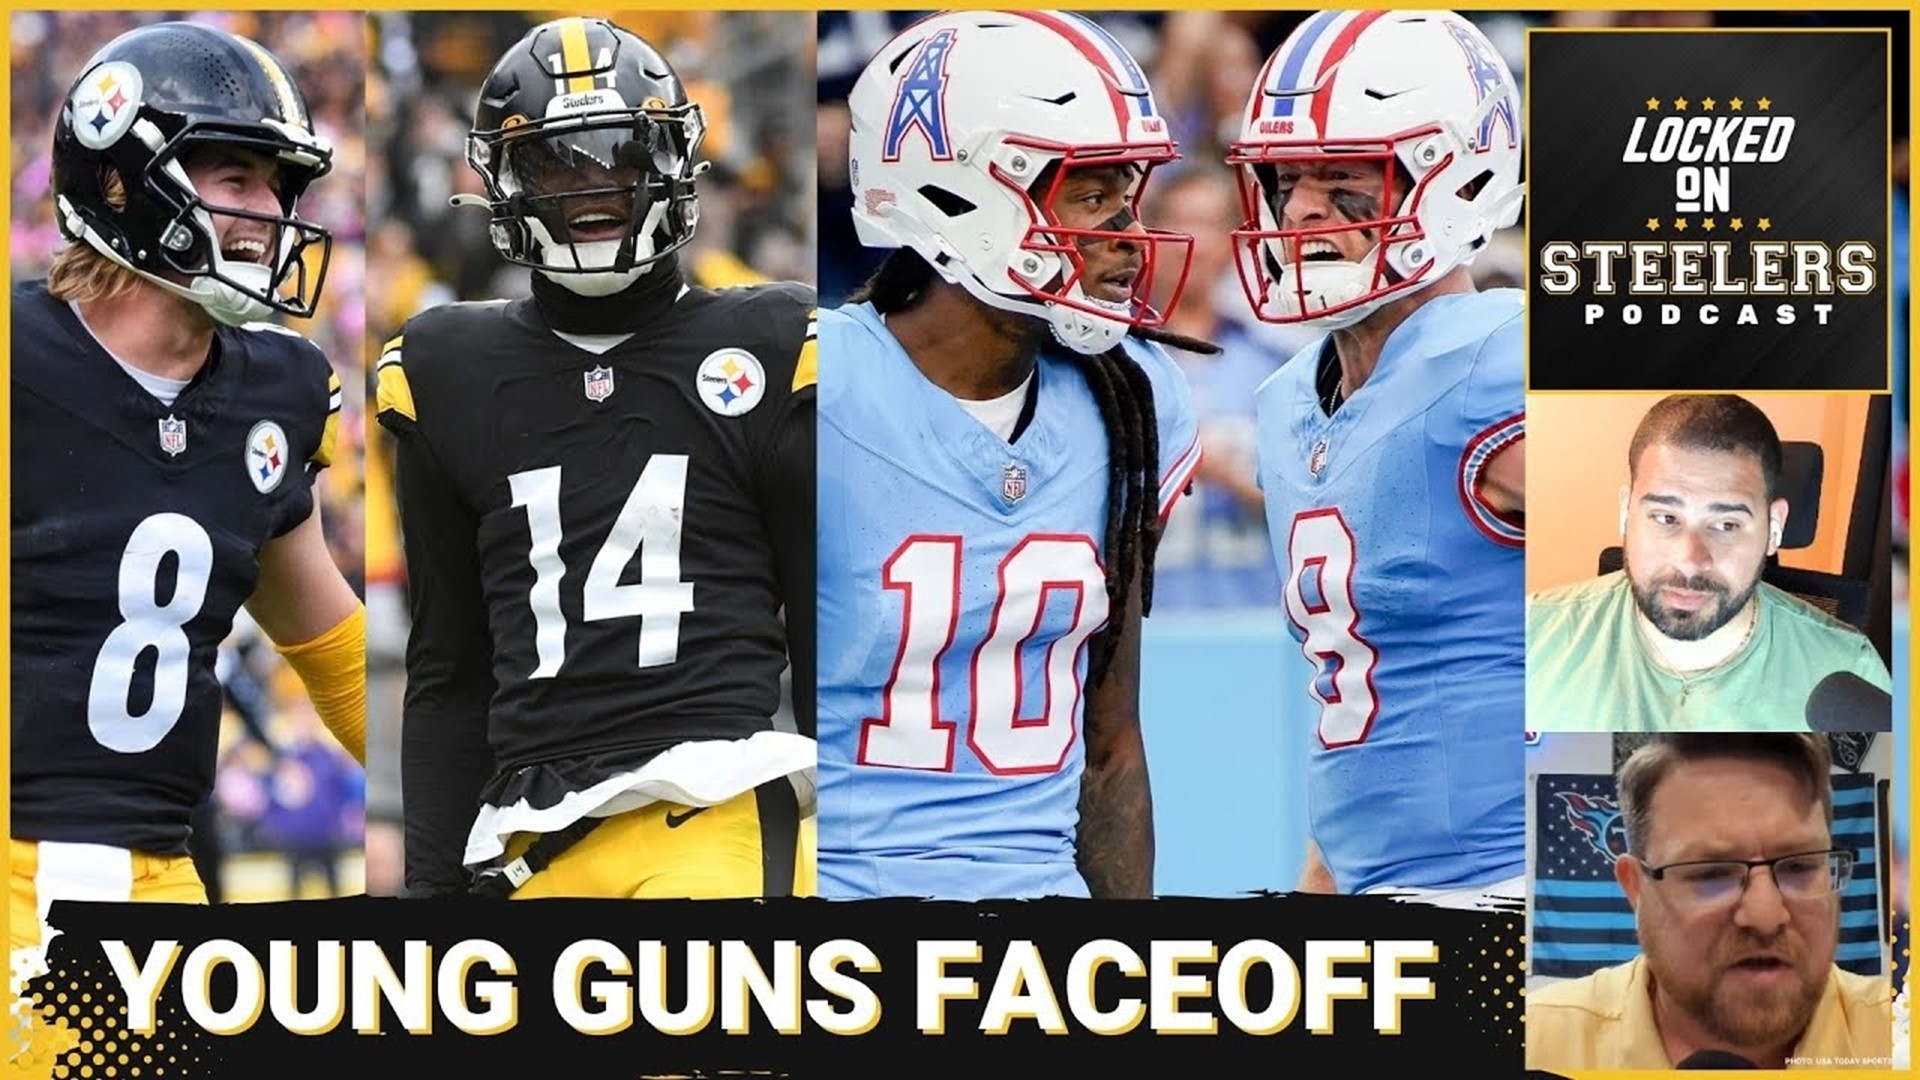 Ranking the Top 5 NFL Players Right Now - Pro Sports Outlook